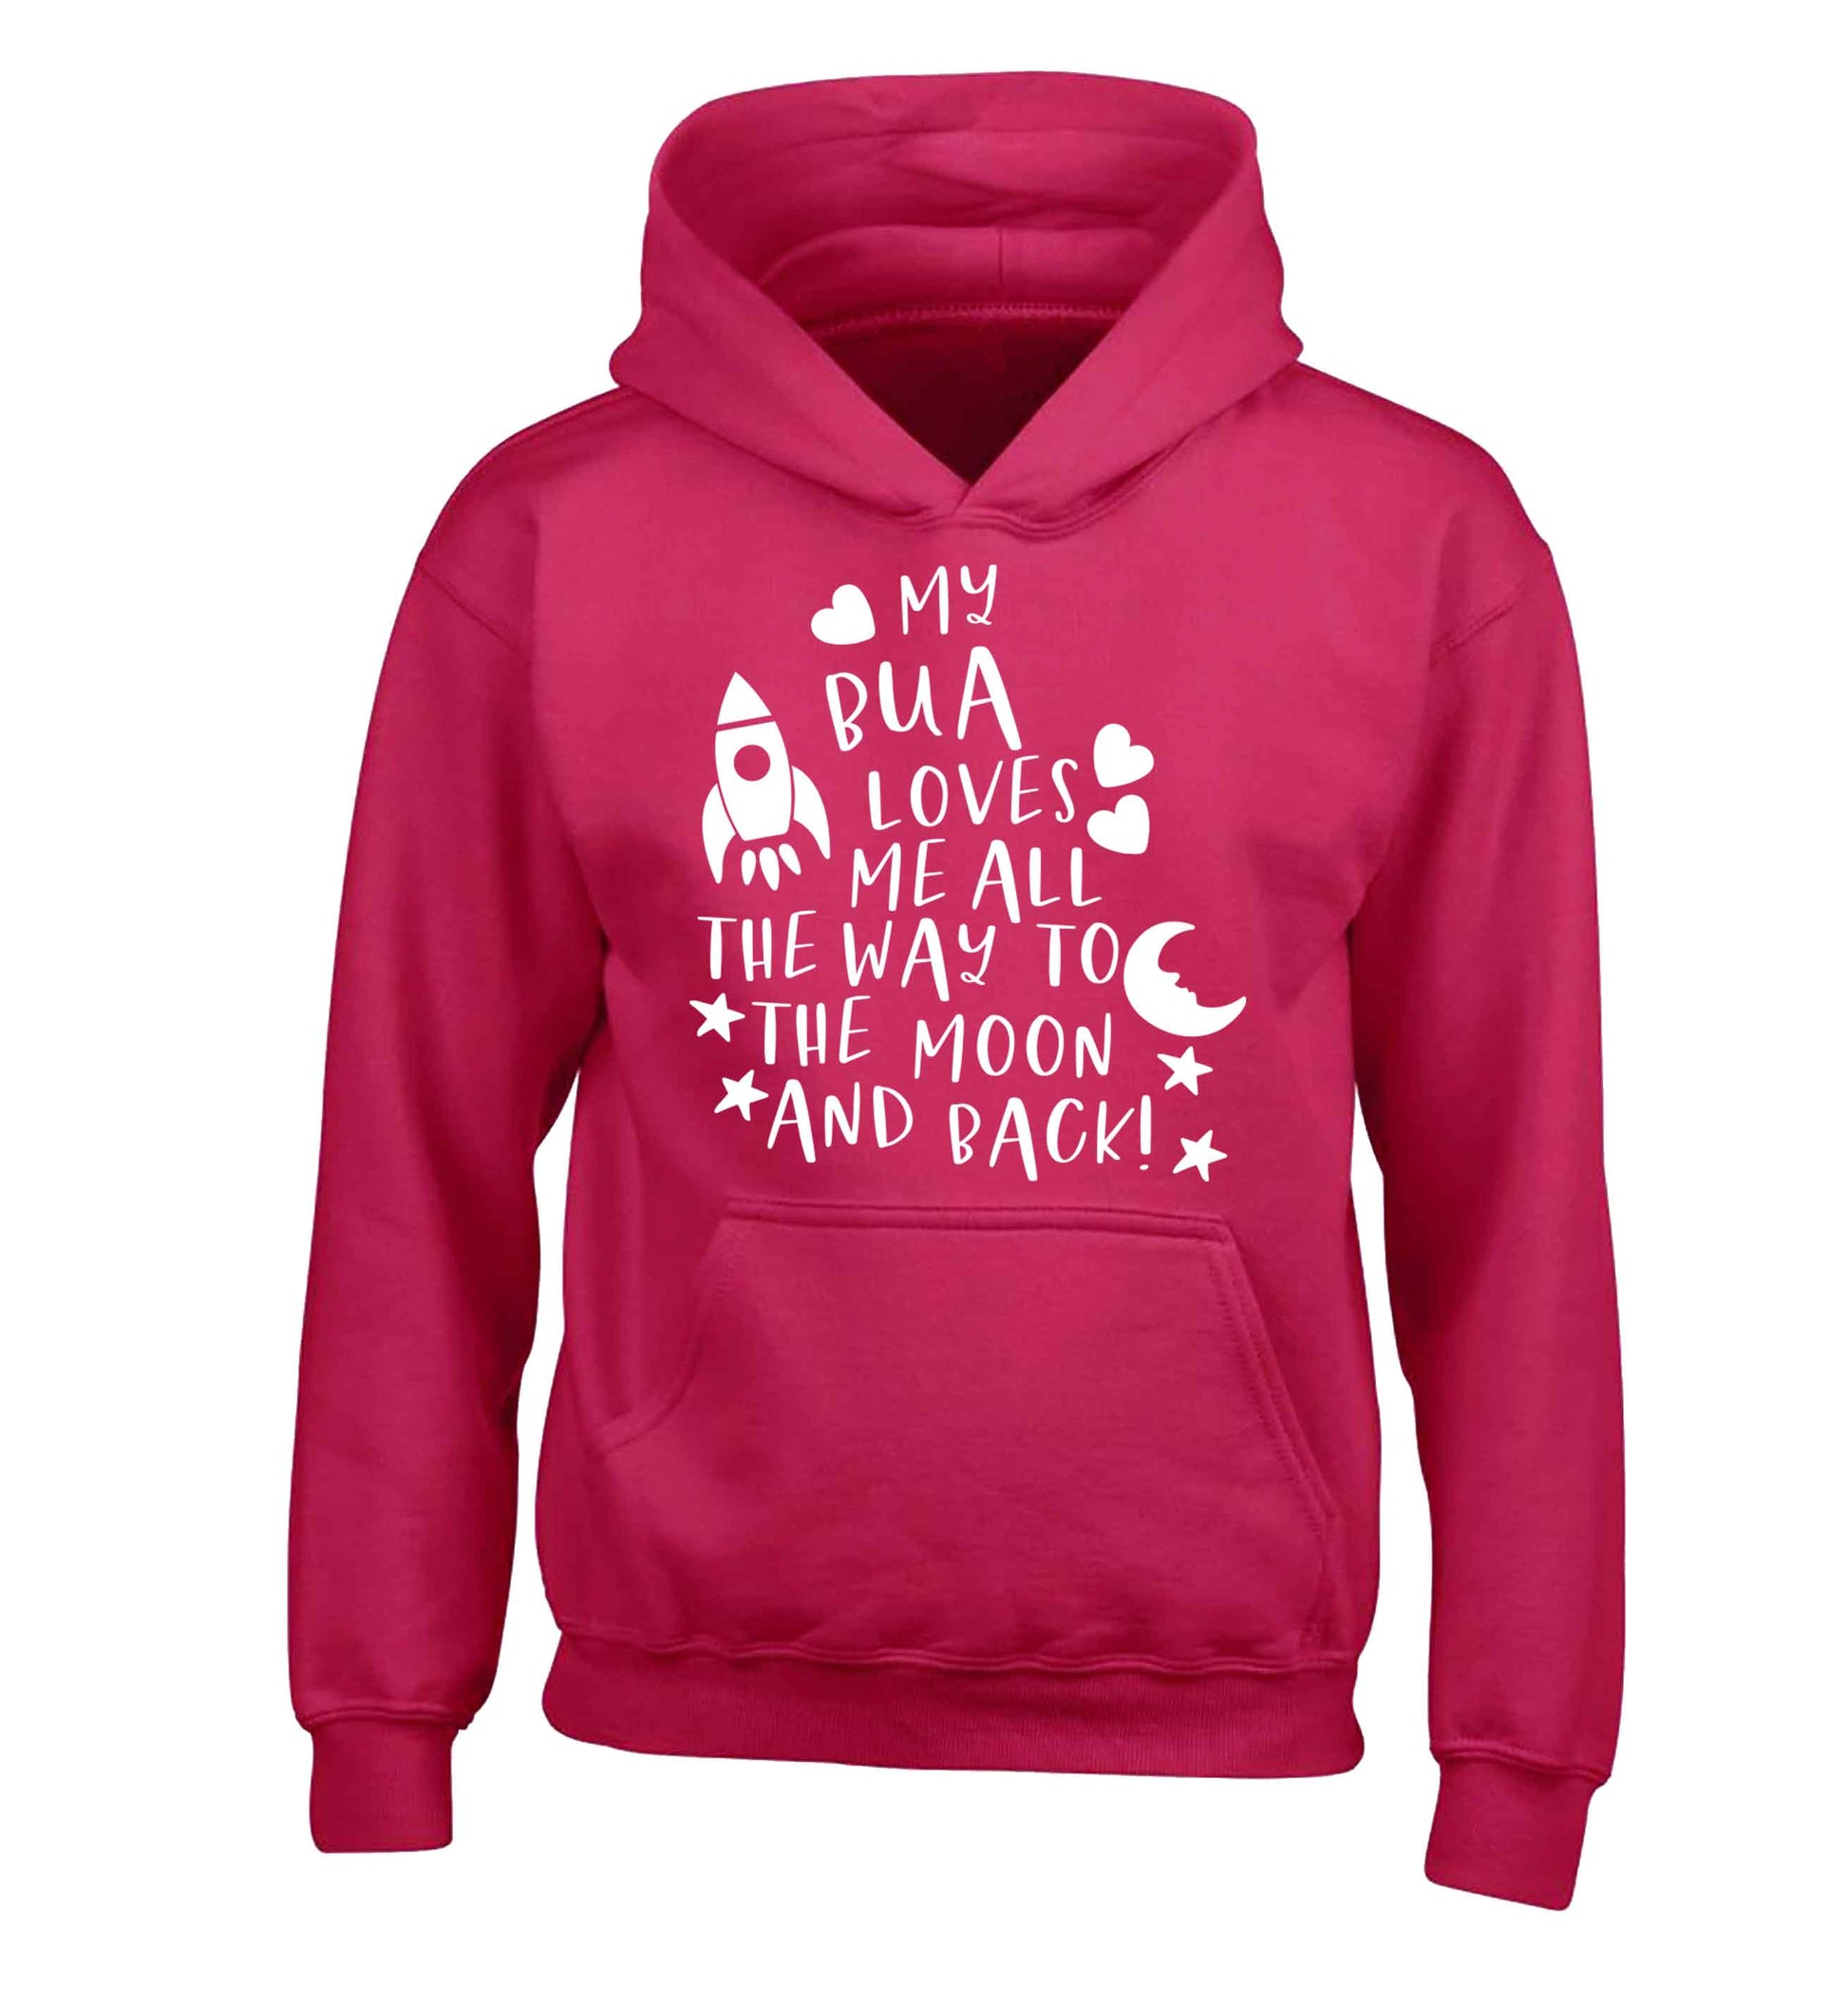 My bua loves me all they way to the moon and back children's pink hoodie 12-13 Years